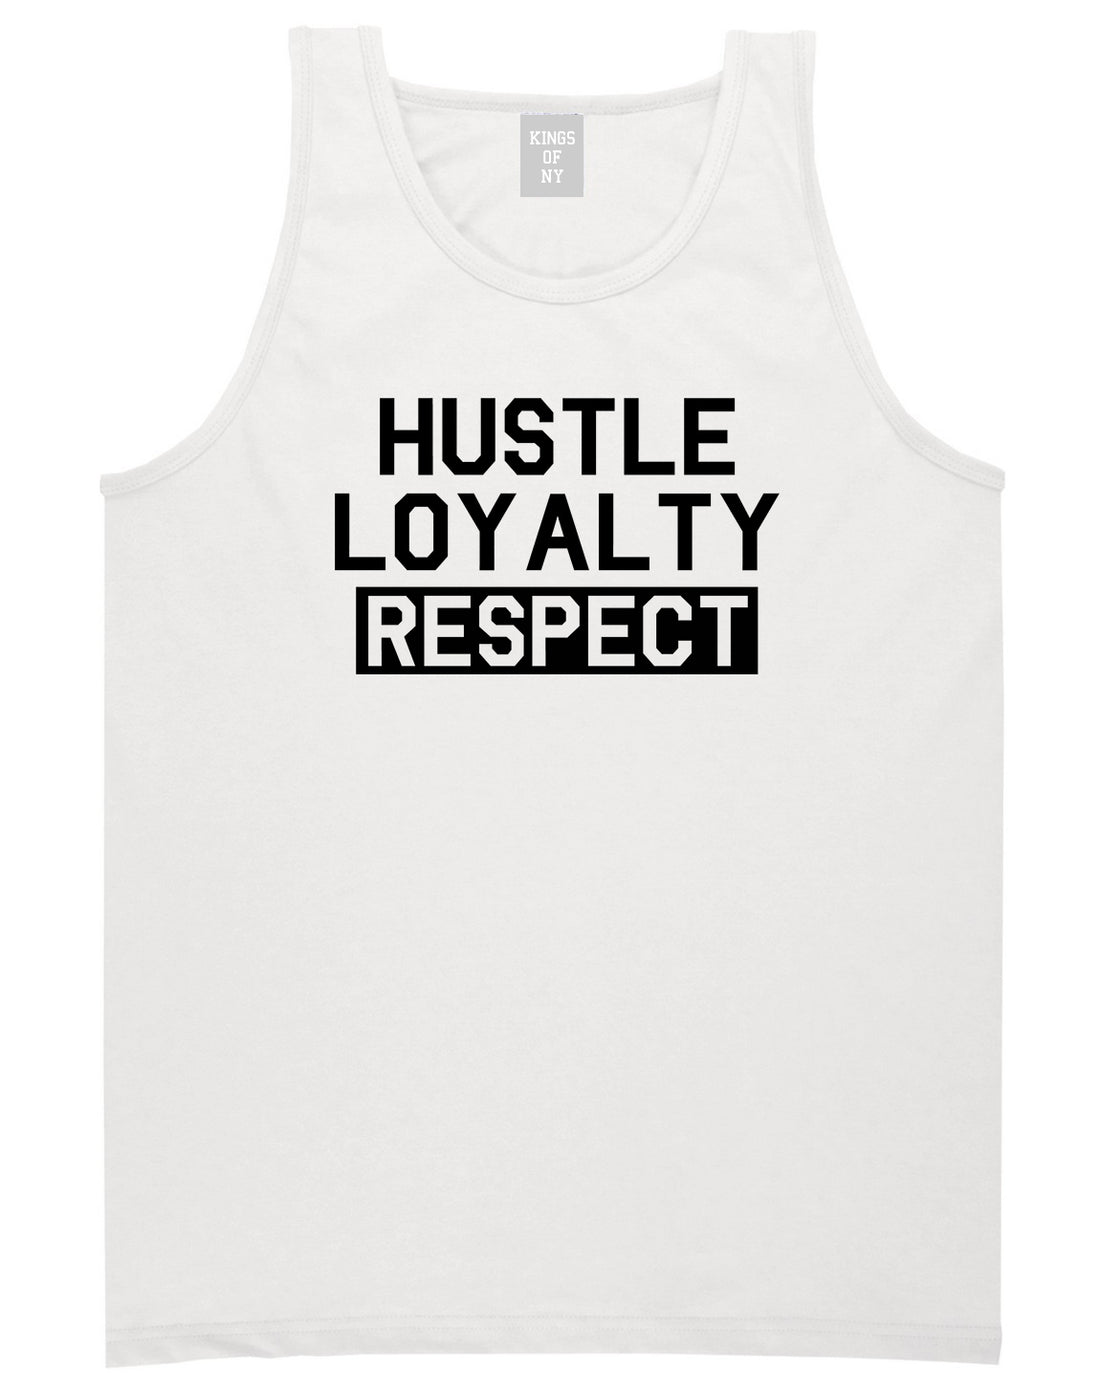 Hustle Loyalty Respect Mens Tank Top Shirt White by Kings Of NY